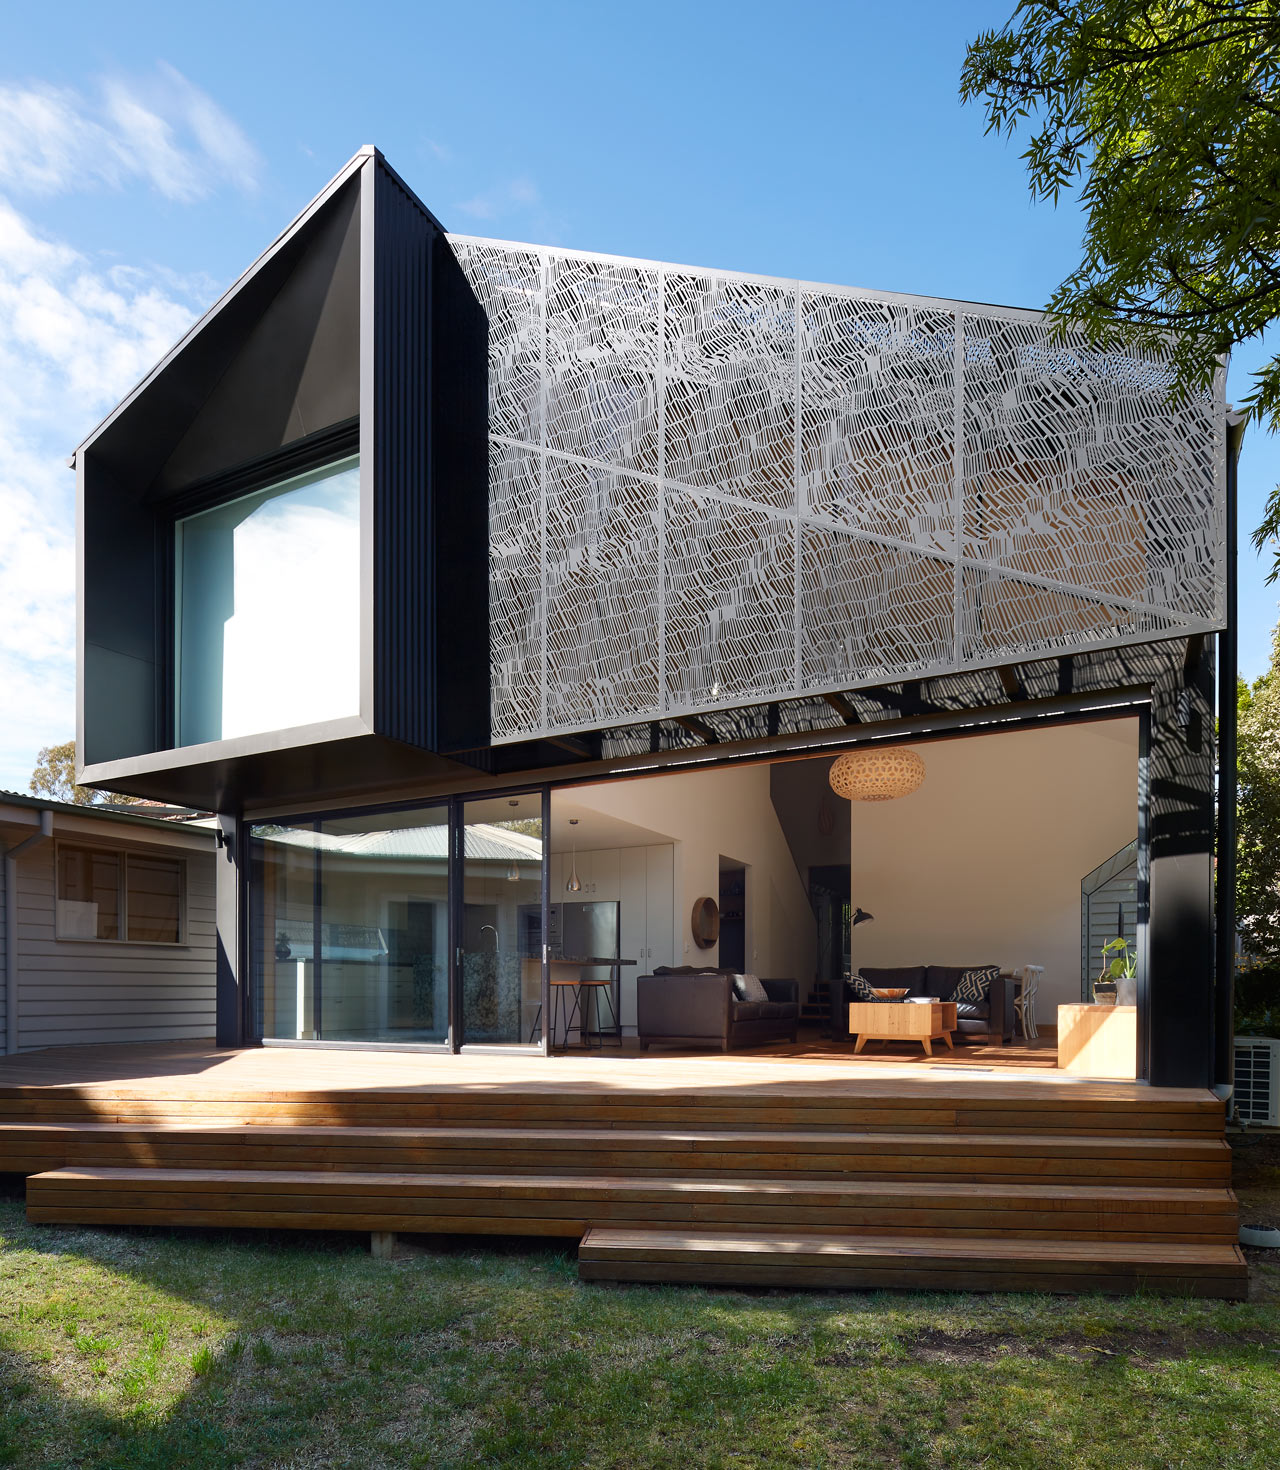 The Elphin House Gets a New Addition With a Textile-Inspired Facade